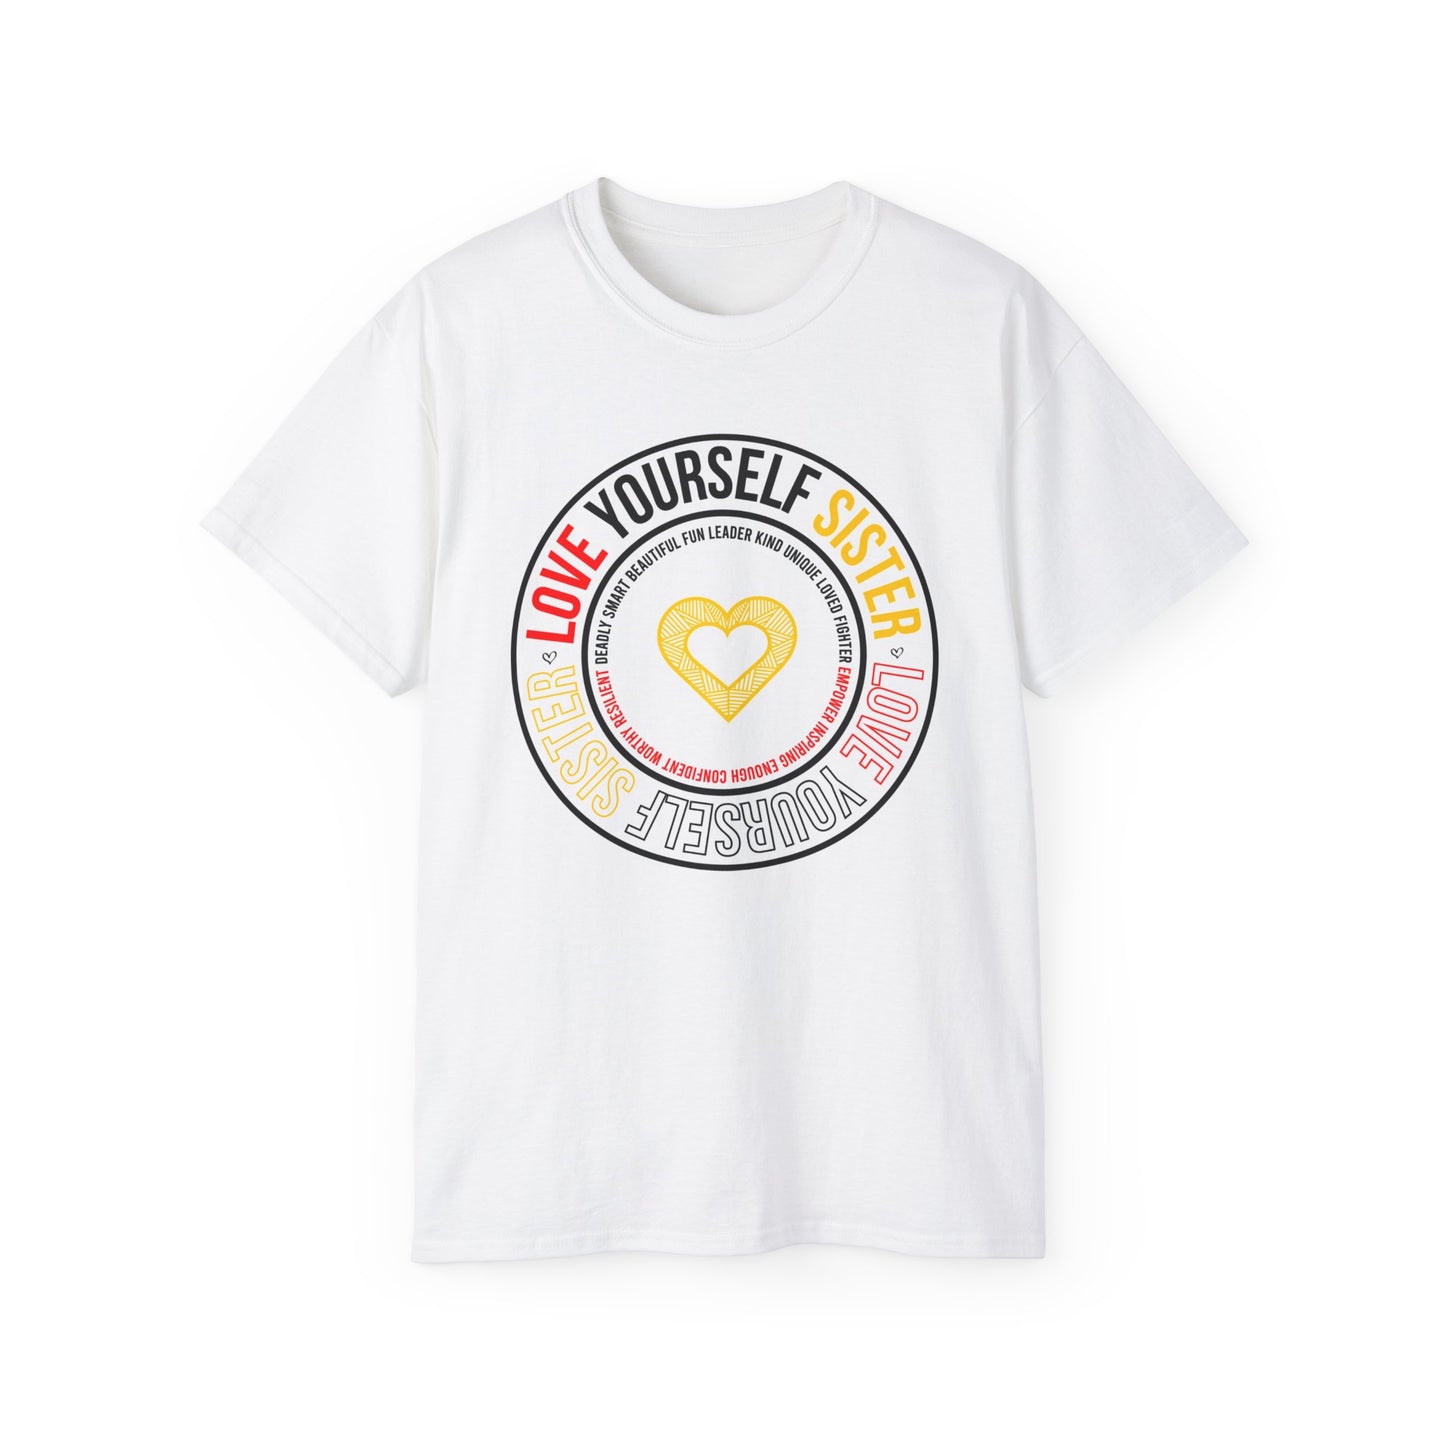 Love yourself sister: Unisex White tee